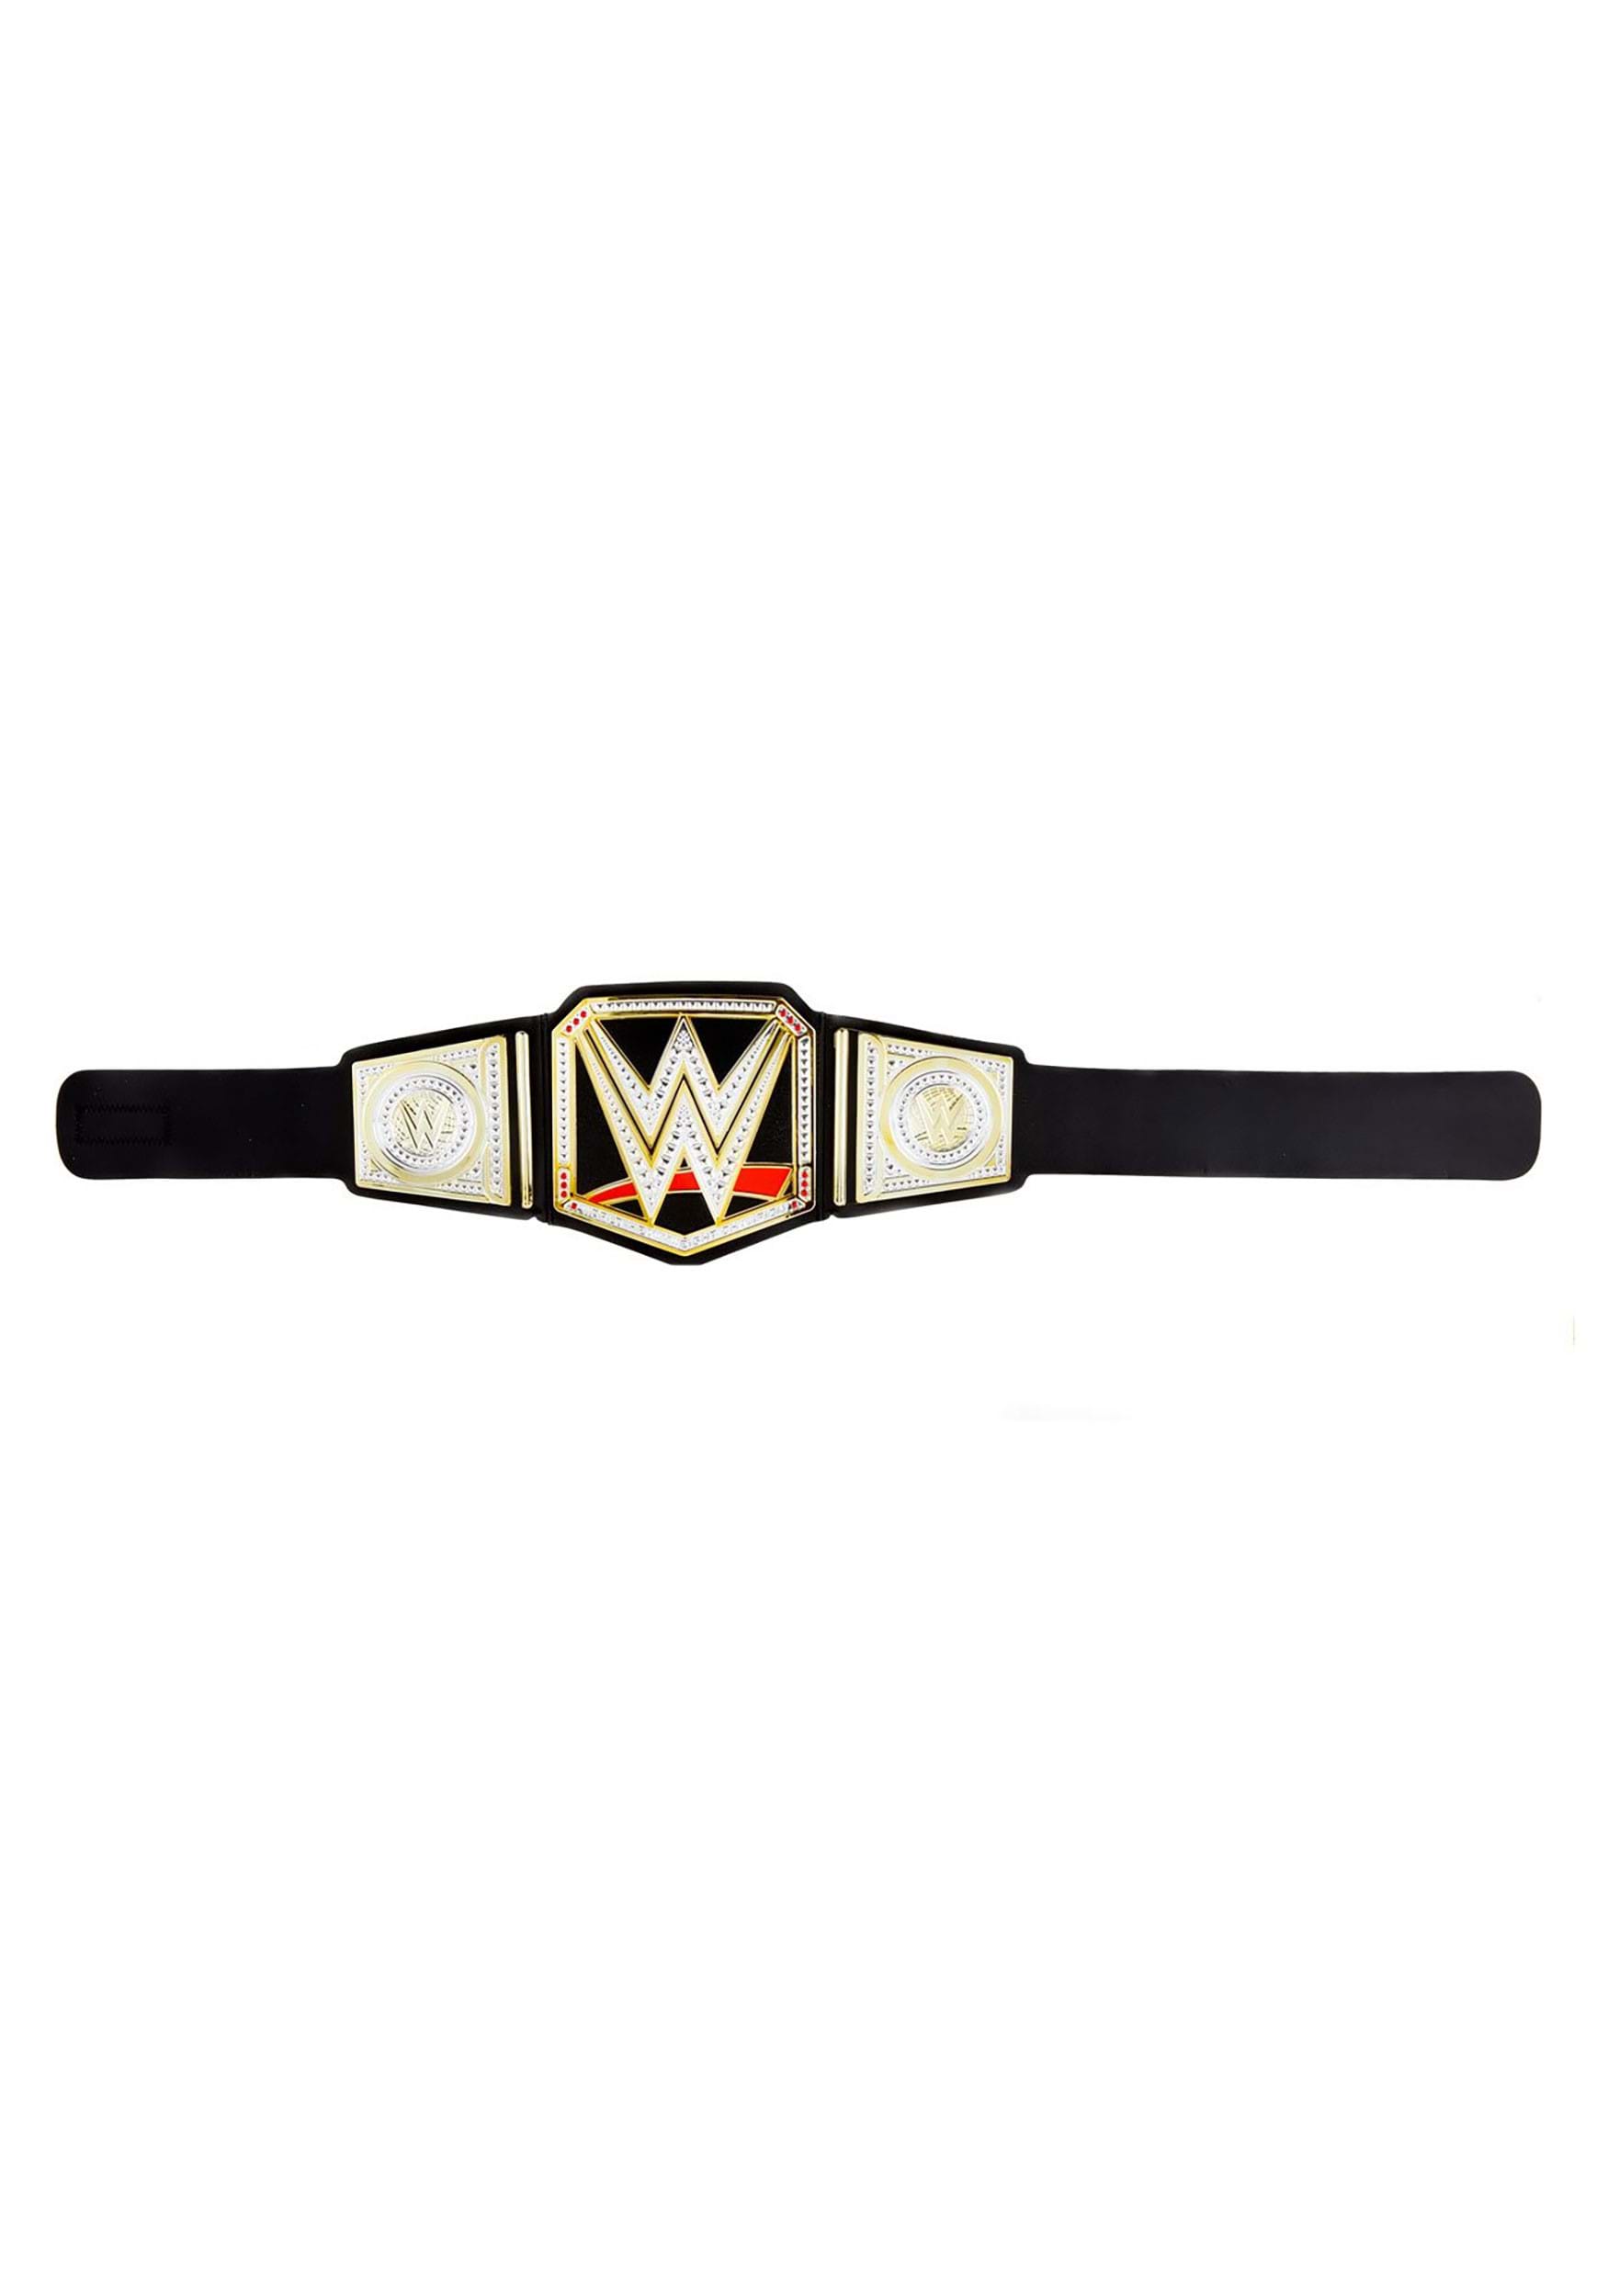 https://images.fun.com/products/93852/2-1-290119/wwe-championship-roleplay-belt-alt-1.jpg